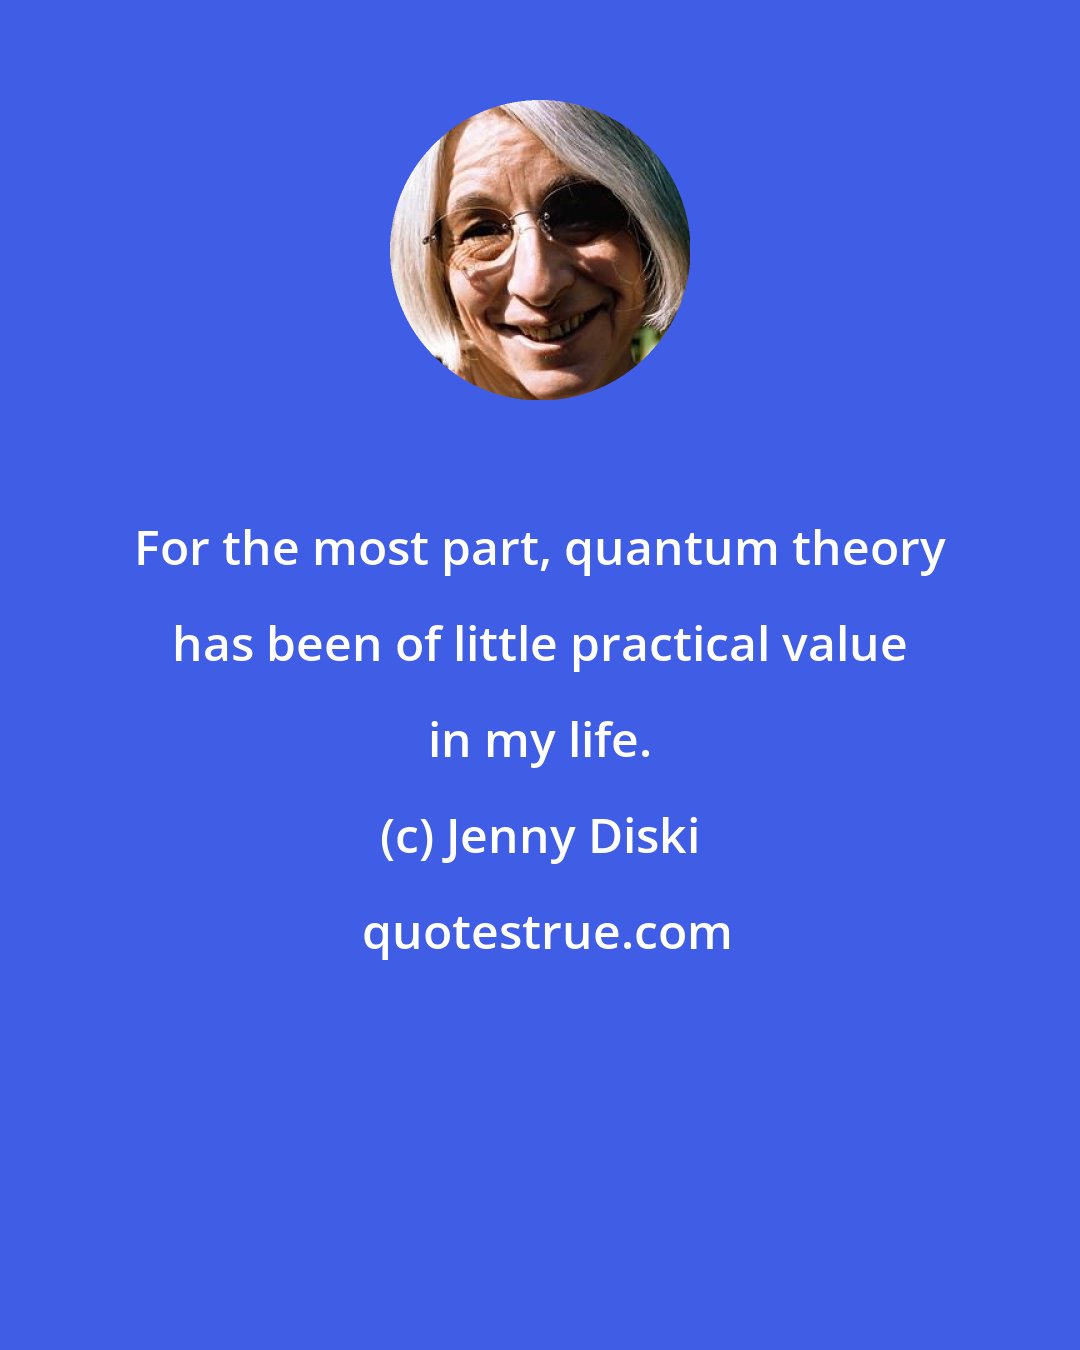 Jenny Diski: For the most part, quantum theory has been of little practical value in my life.